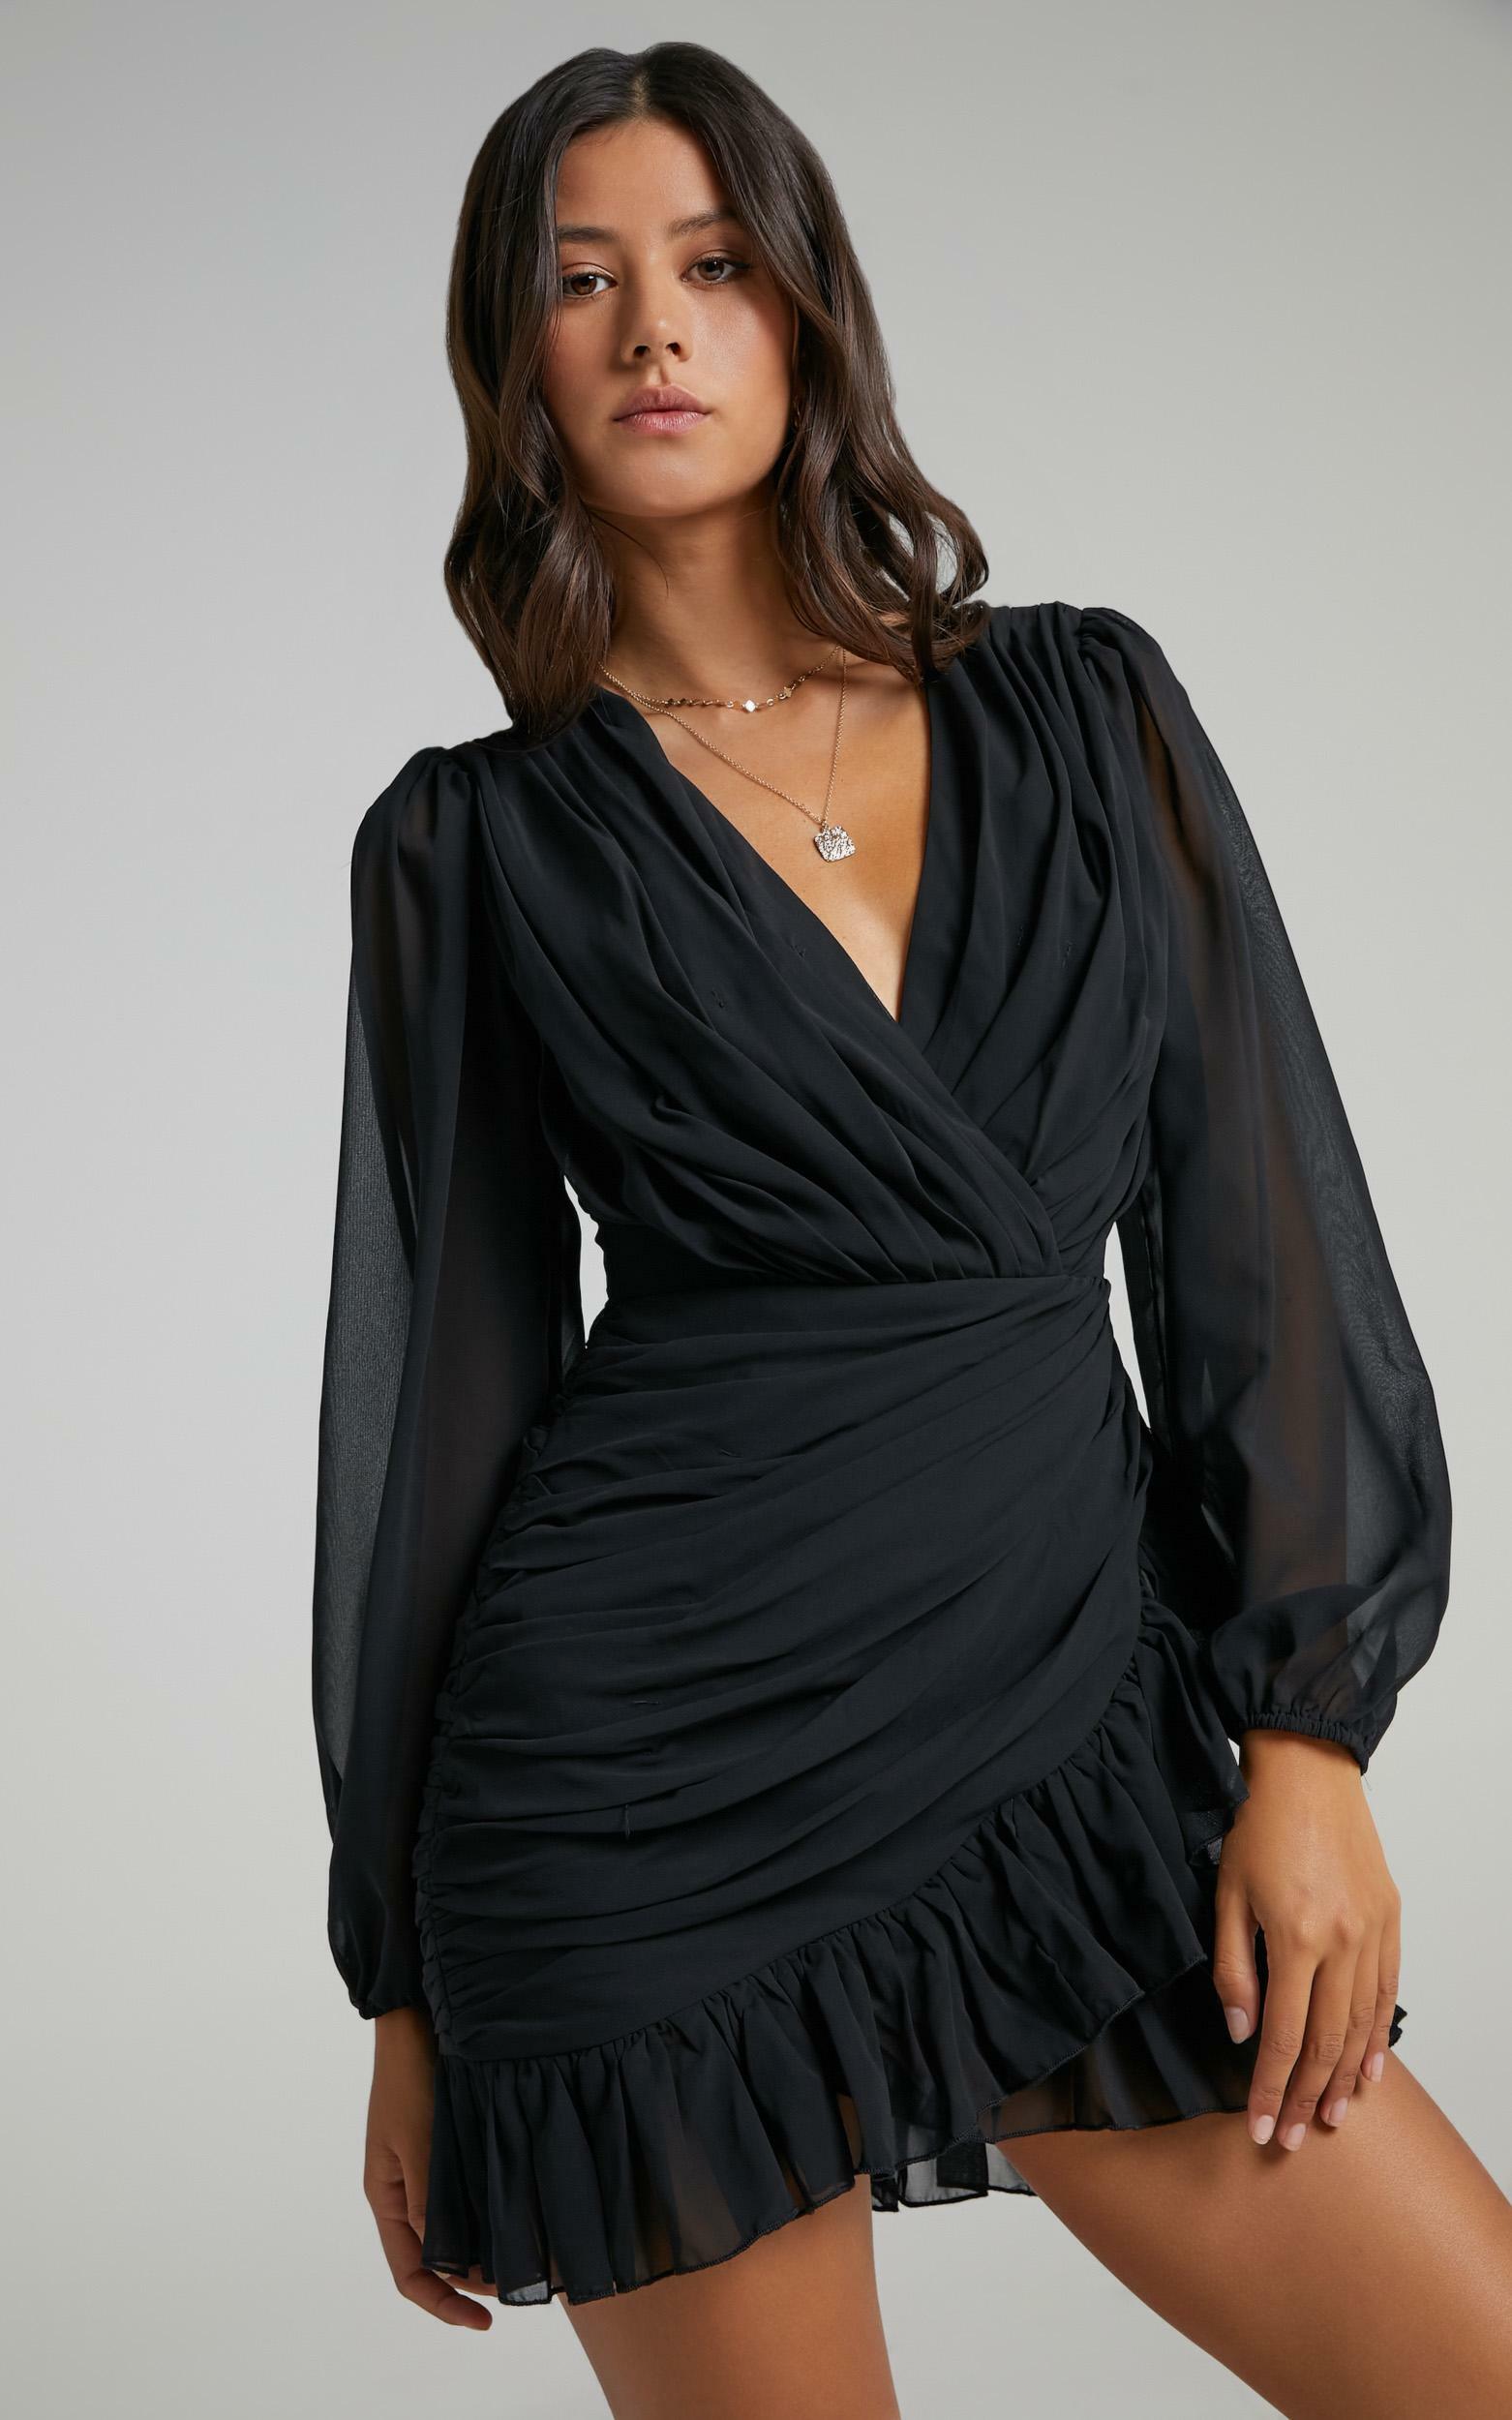 Can I Be Your Honey Plunge Balloon Sleeve Mini Dress in Black - 14, BLK1, hi-res image number null